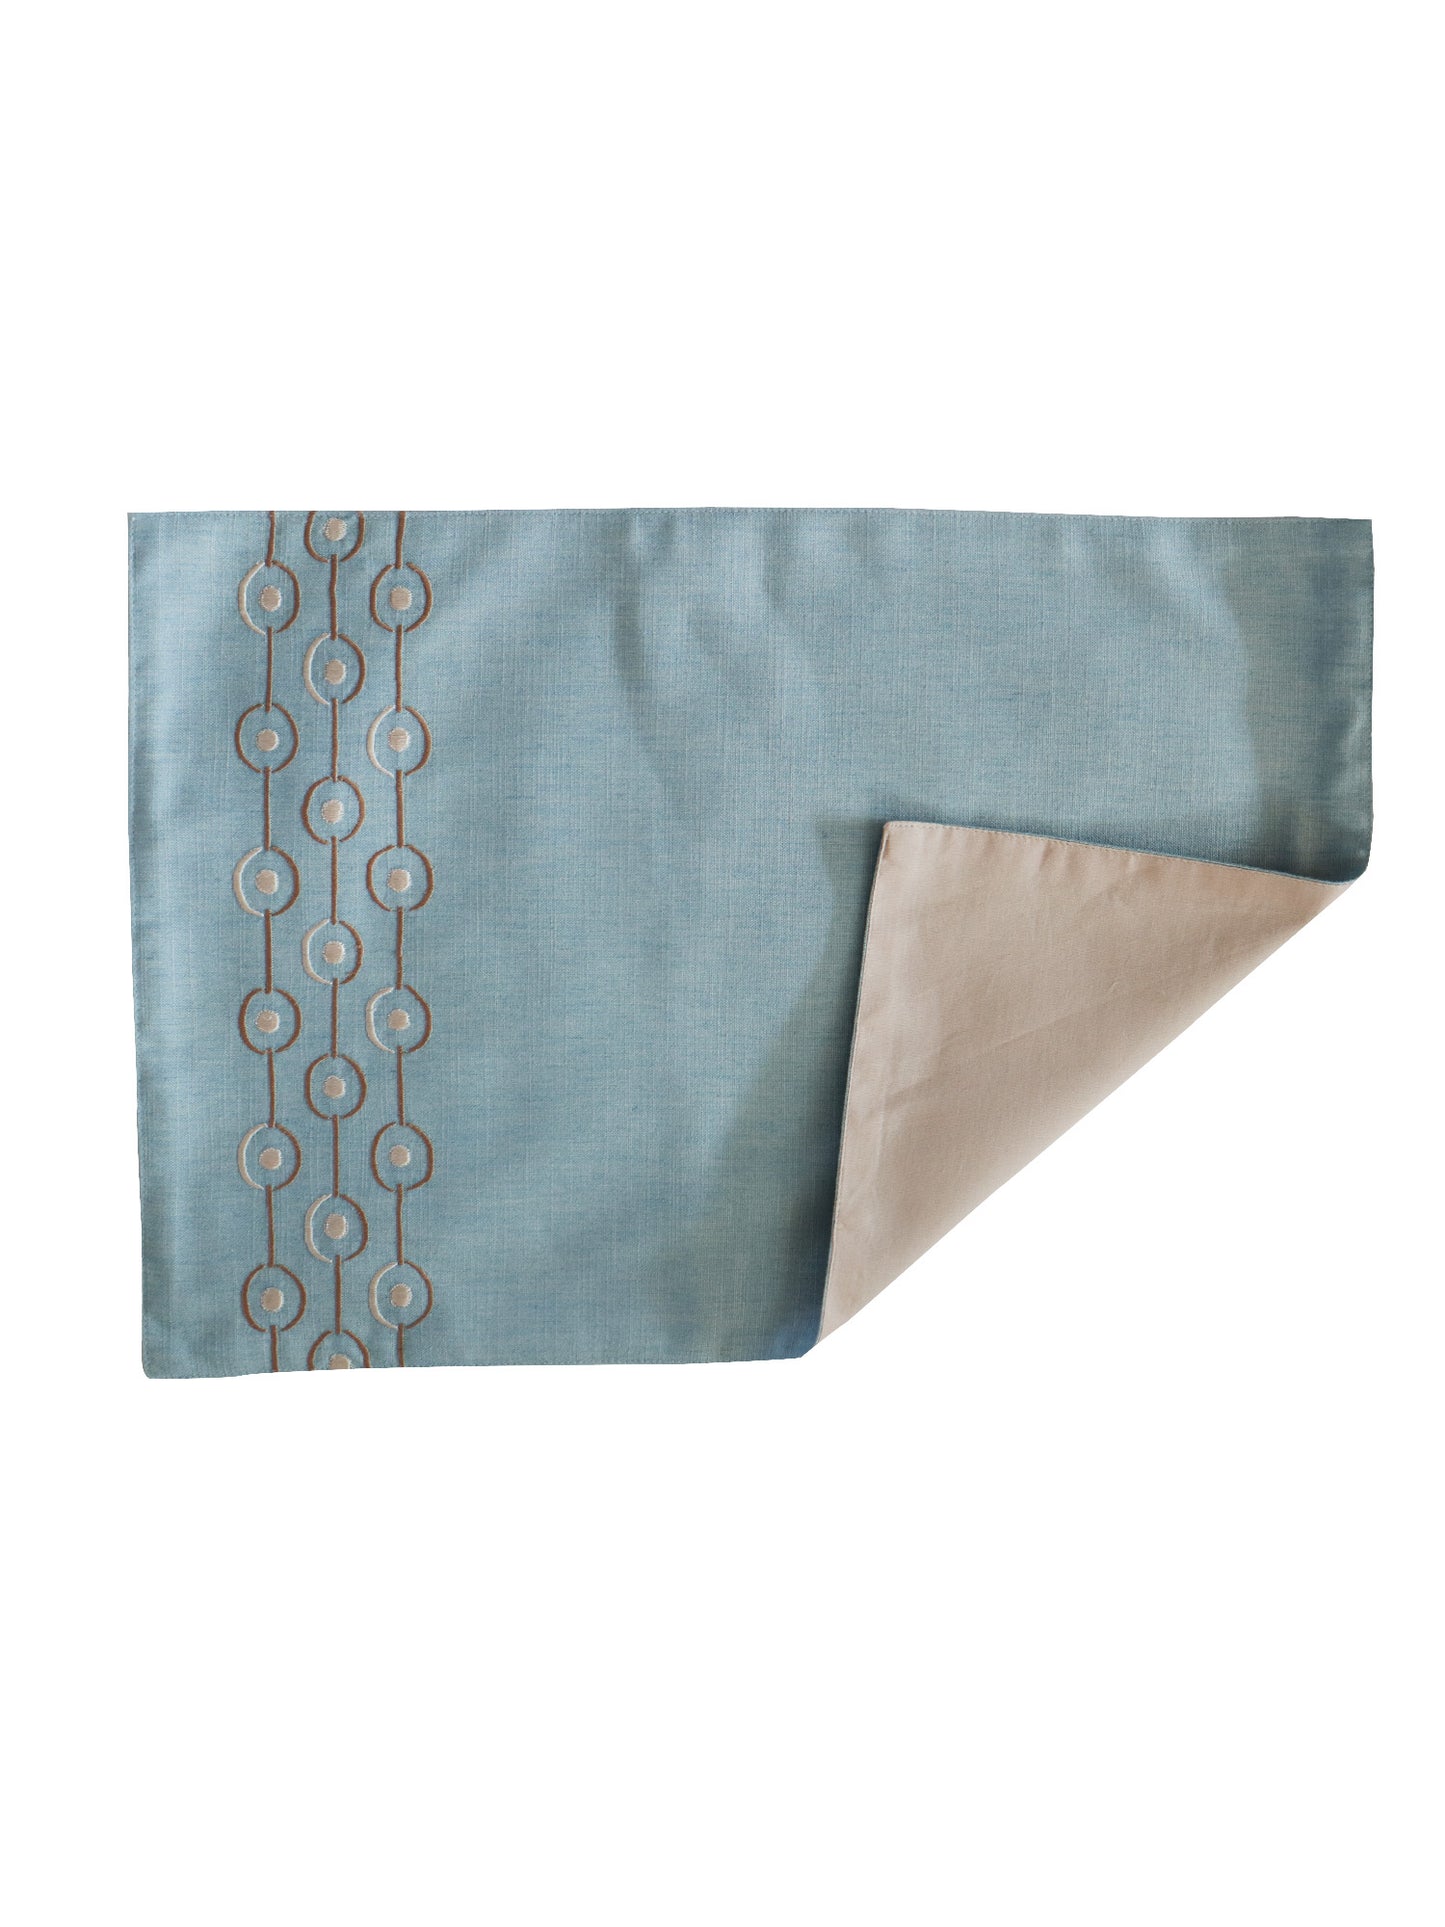 Embroidered Placemat/Tablemats and Napkins Set Polycanvas - Light Blue Set of 6 Mats 13x19 in & 6 Napkins 16x16in (33x48 cms, 40x40 cms)